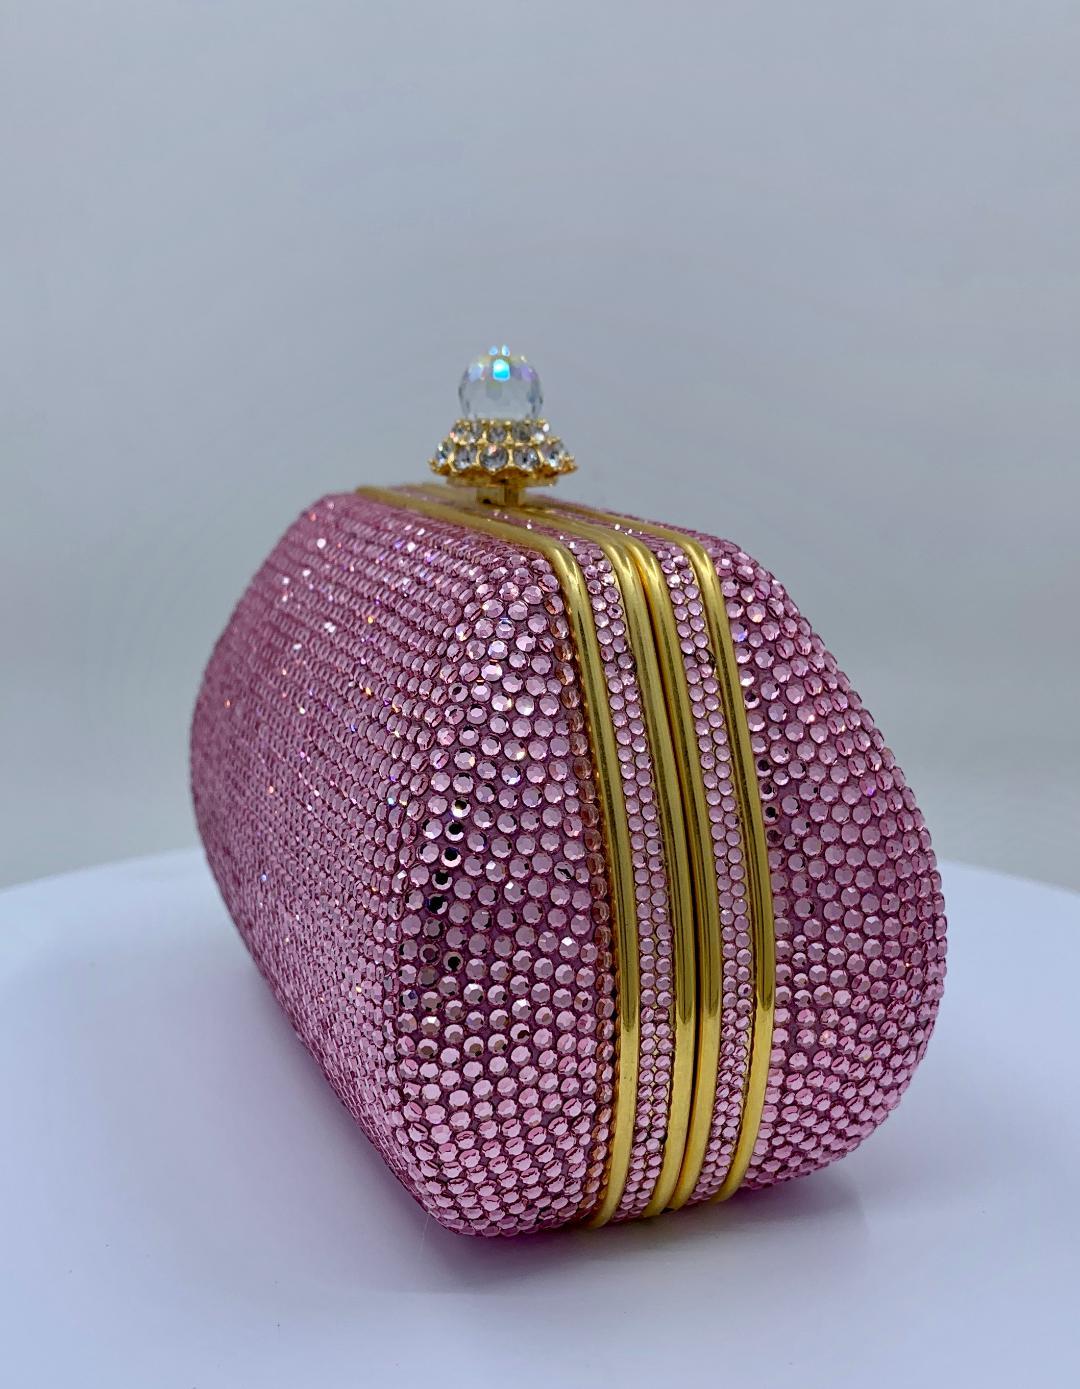 Glistening Judith Leiber Pink Crystal Minaudiere Evening Bag With Shoulder Chain 6